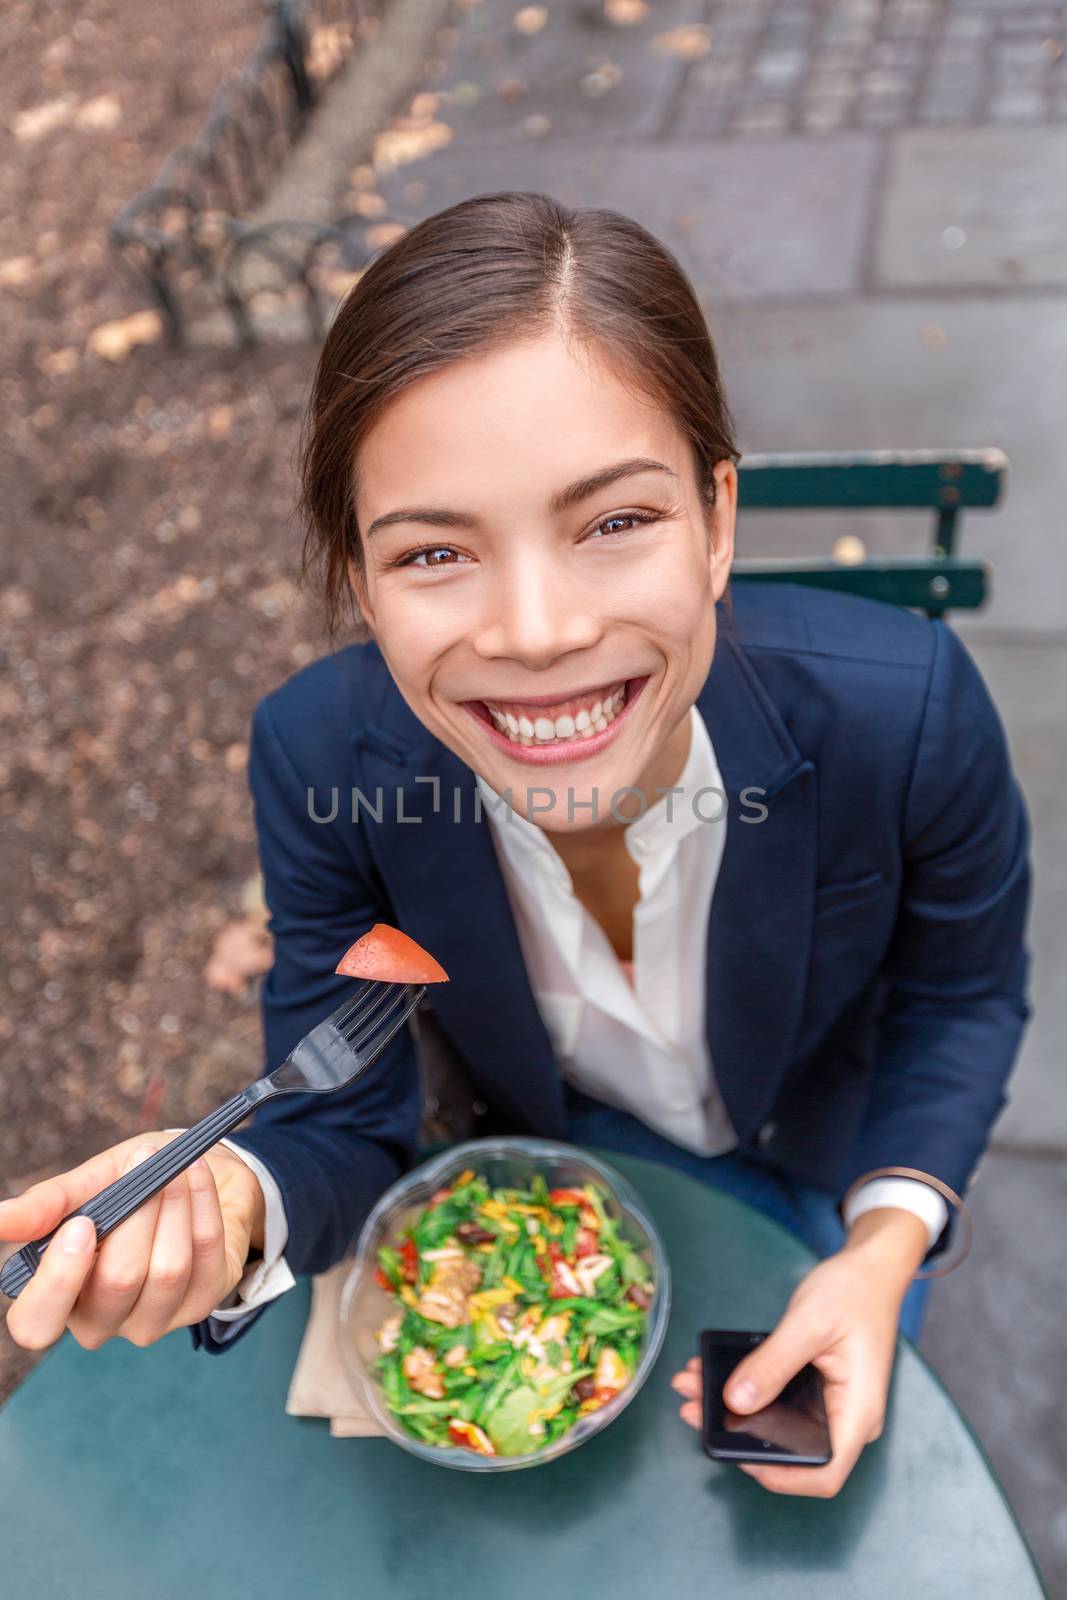 Lunch break healthy eating Asian business woman ready to eat salad bowl in City Park living urban lifestyle using phone. Happy smiling multiracial chinese businesswoman, New York City, USA.